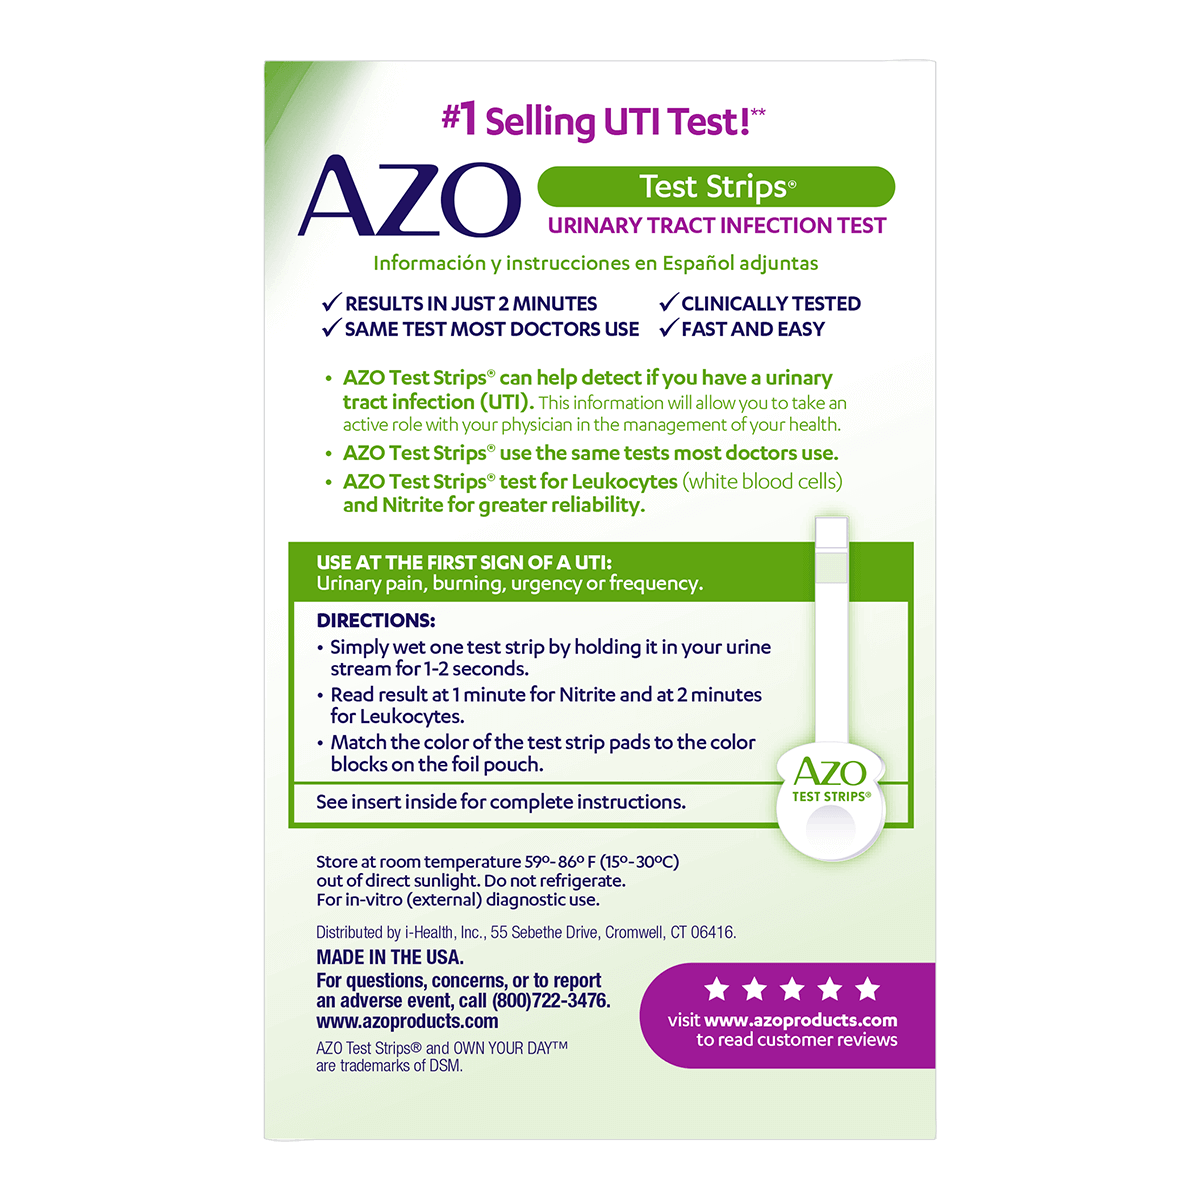 AZO TEST STRIPS URINARY TRACT INFECTION TEST